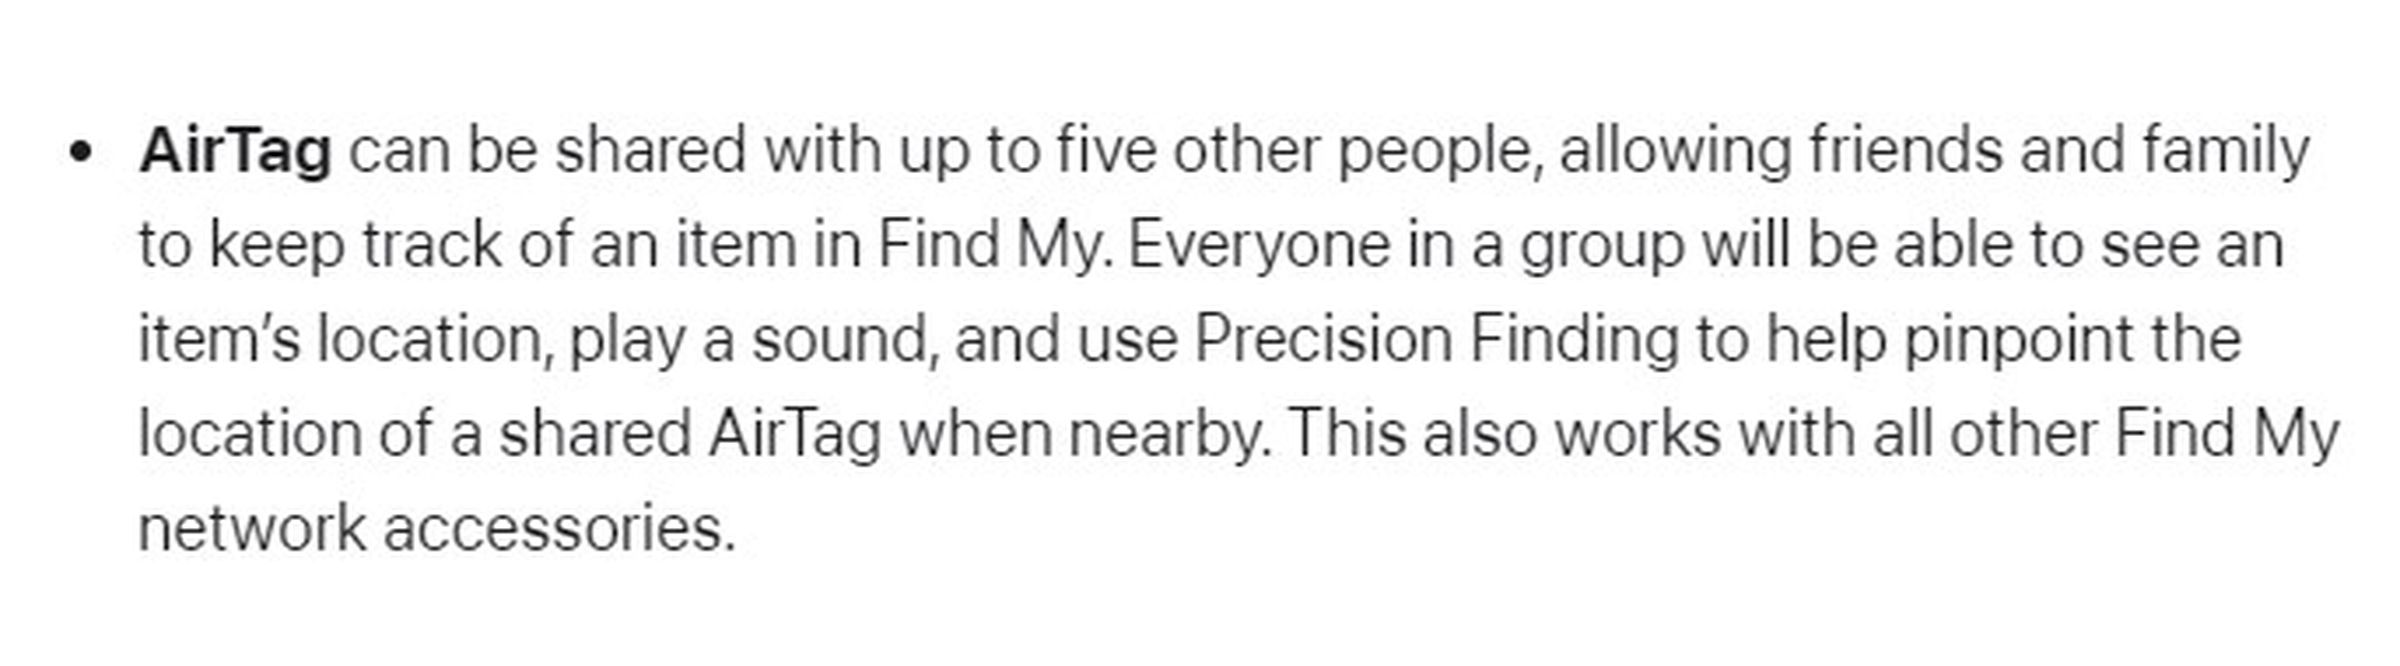 From Apple’s press release: “Everyone in a group will be able to see an item’s location, play a sound, and use Precision Finding”